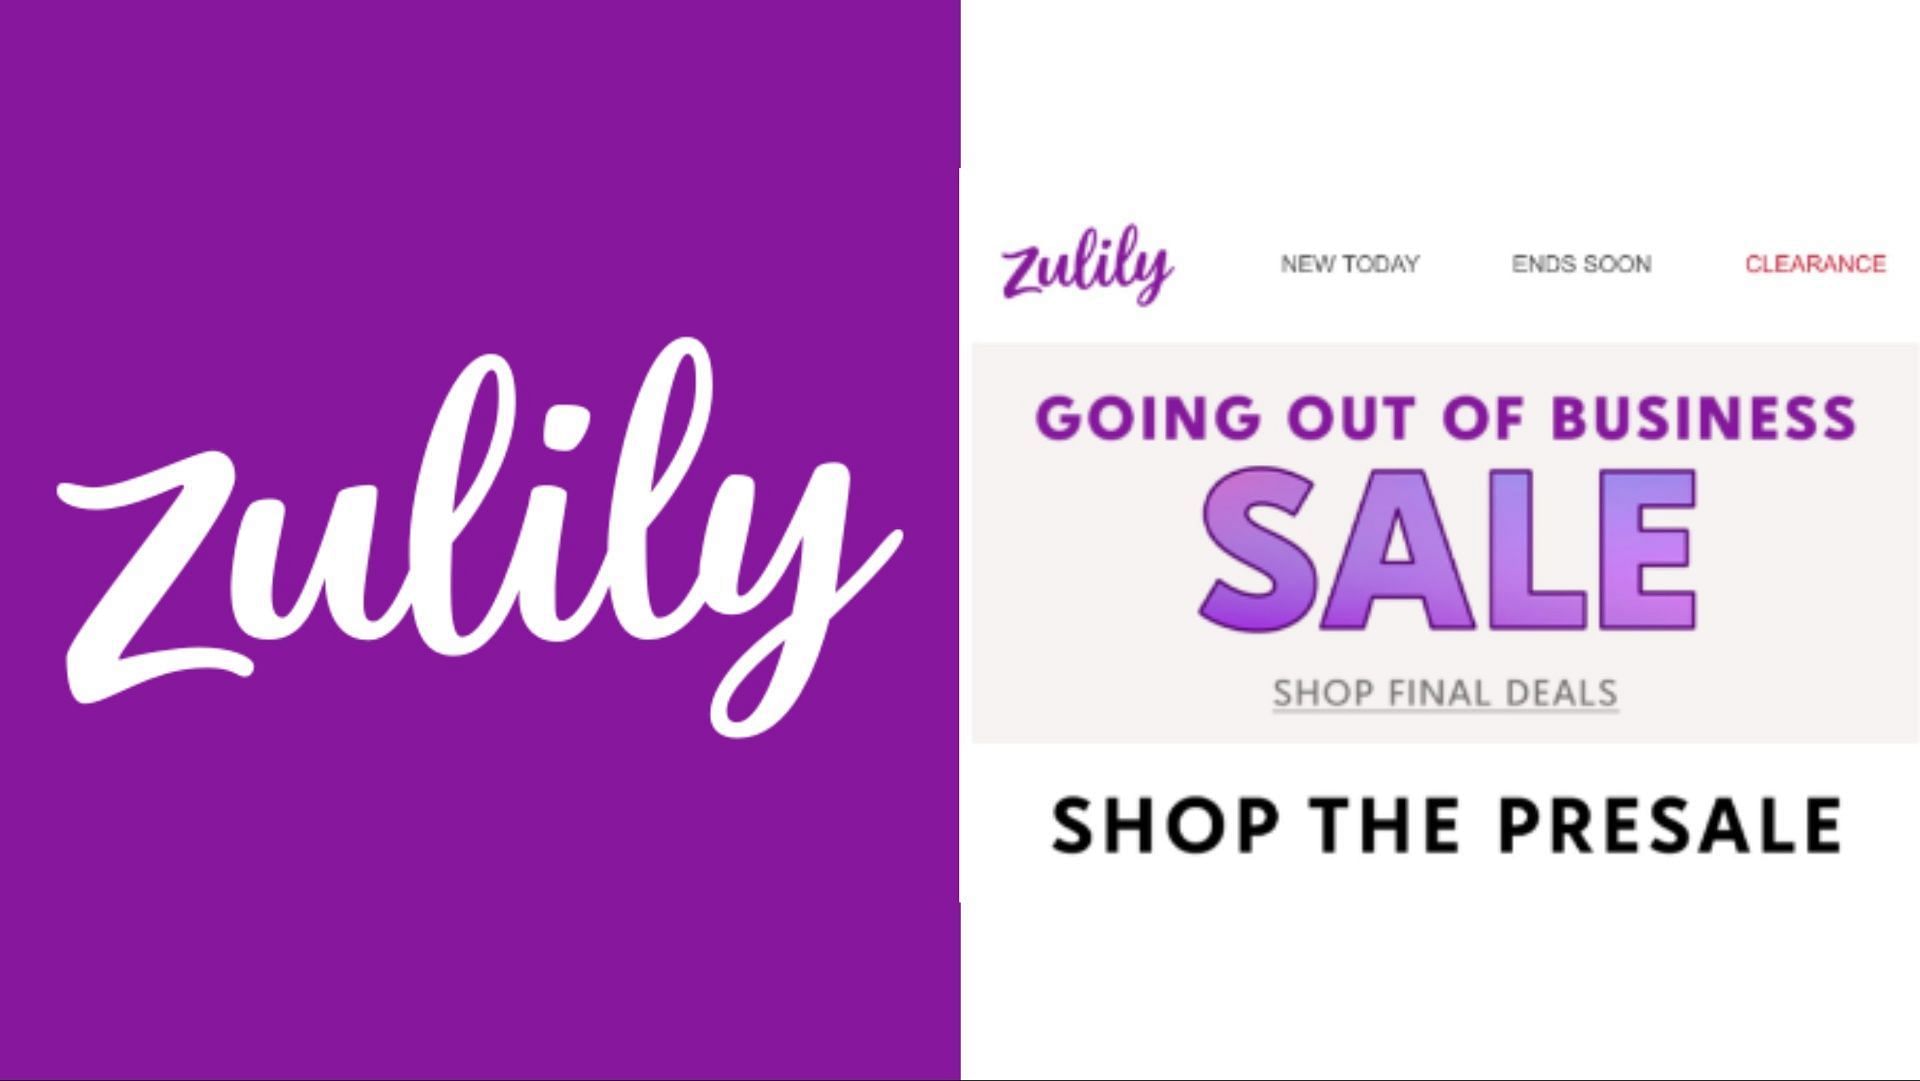 Zulily was founded in 2009 in Seattle. (Image via X/zulily/workwithno)